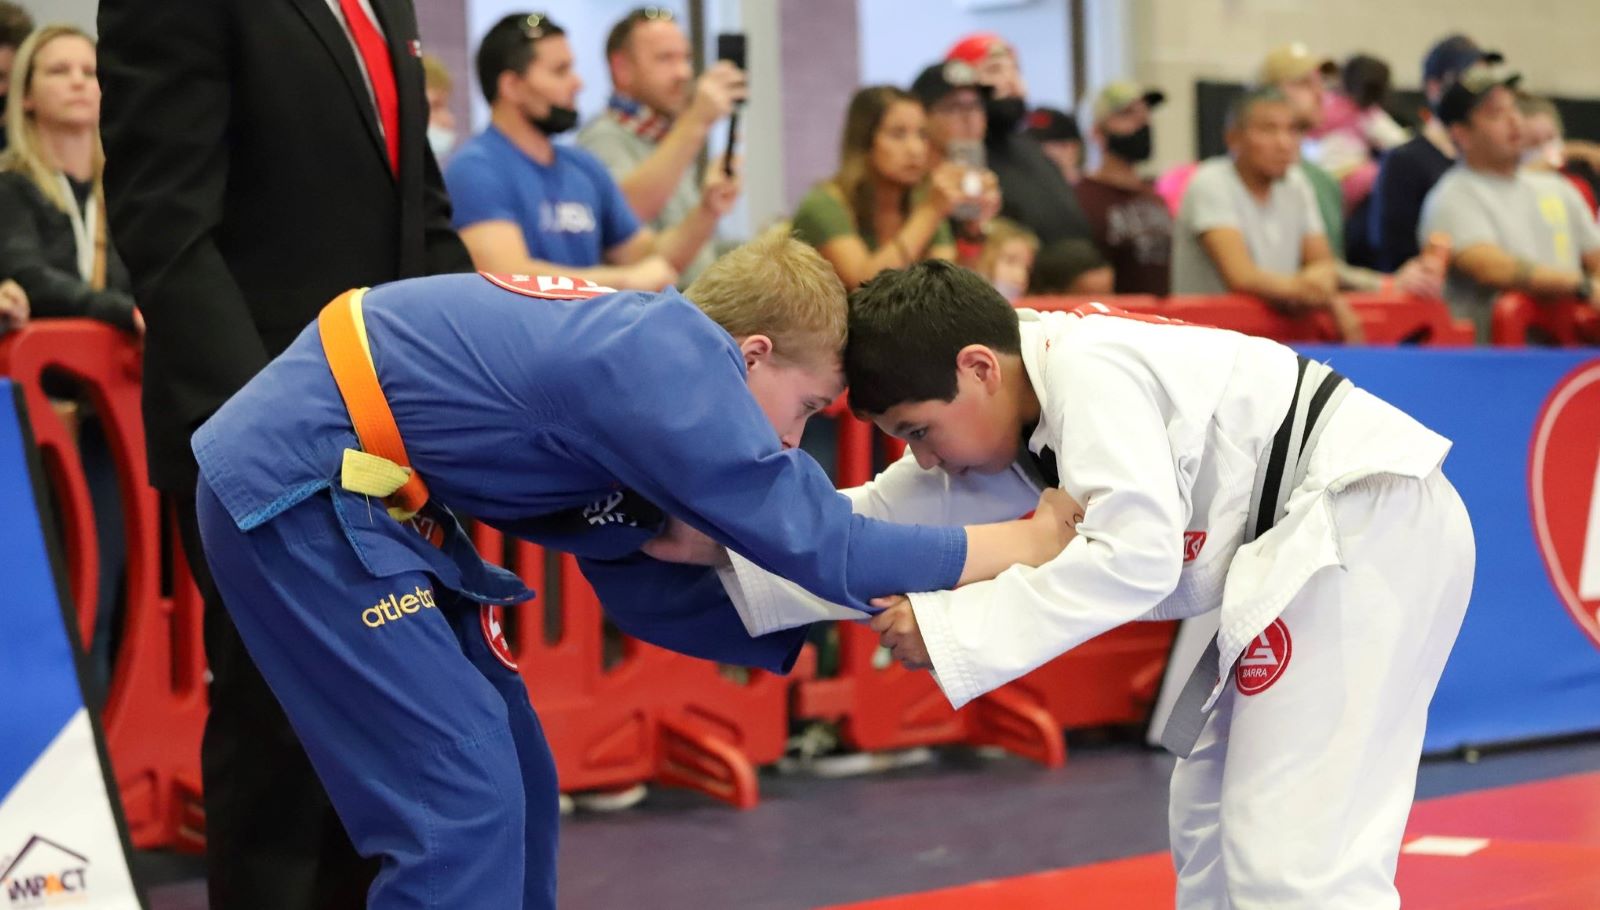 Martial Arts Training for Kids Near Me St. Clair, MO | St. Clair, MO Kids Martial Arts | Gracie Barra Washington